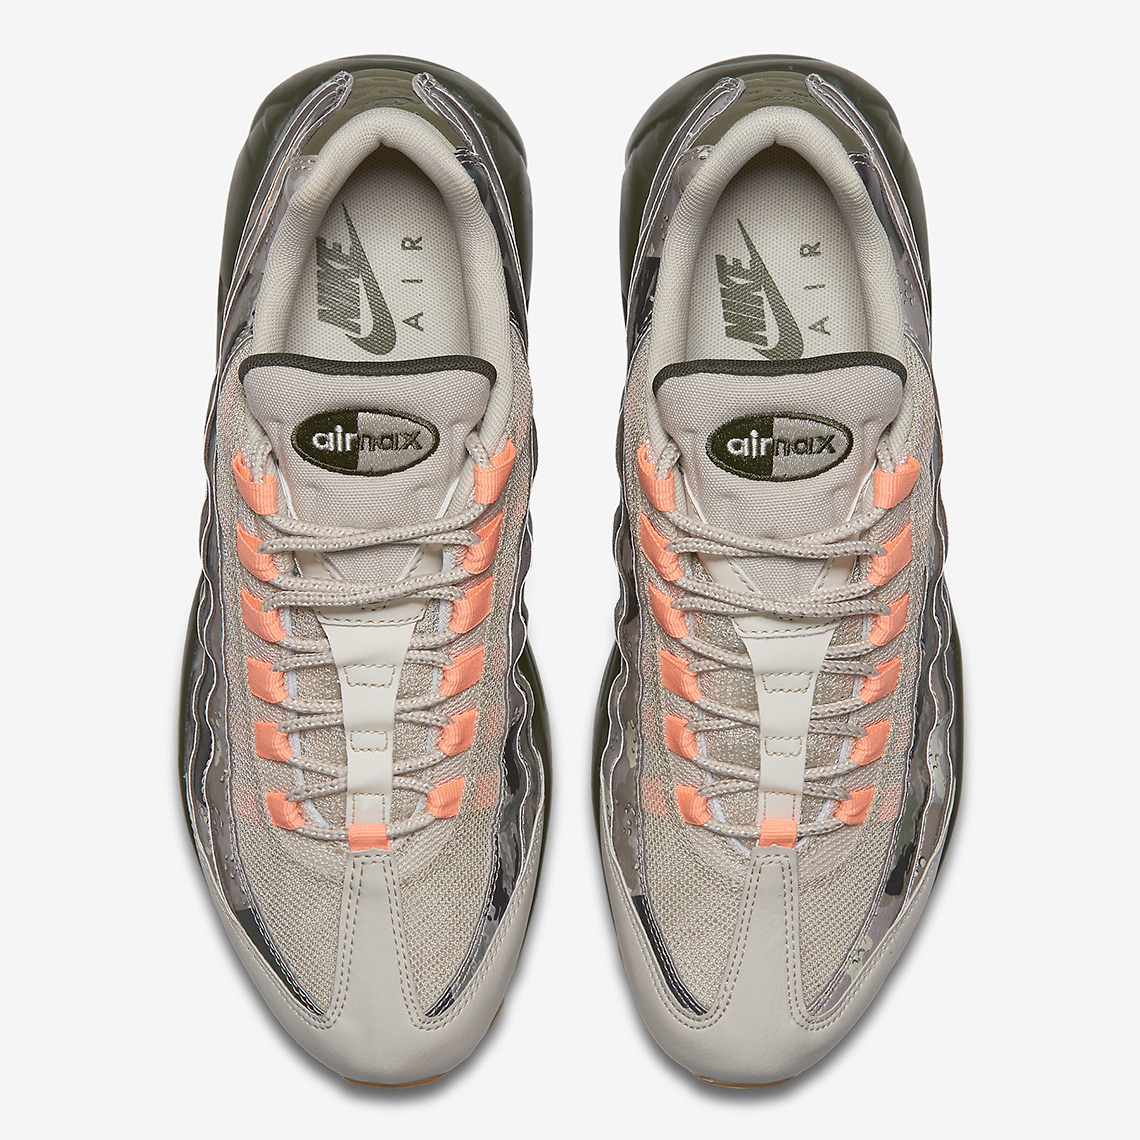 Nike Air Max 95 Camo Official Images 5